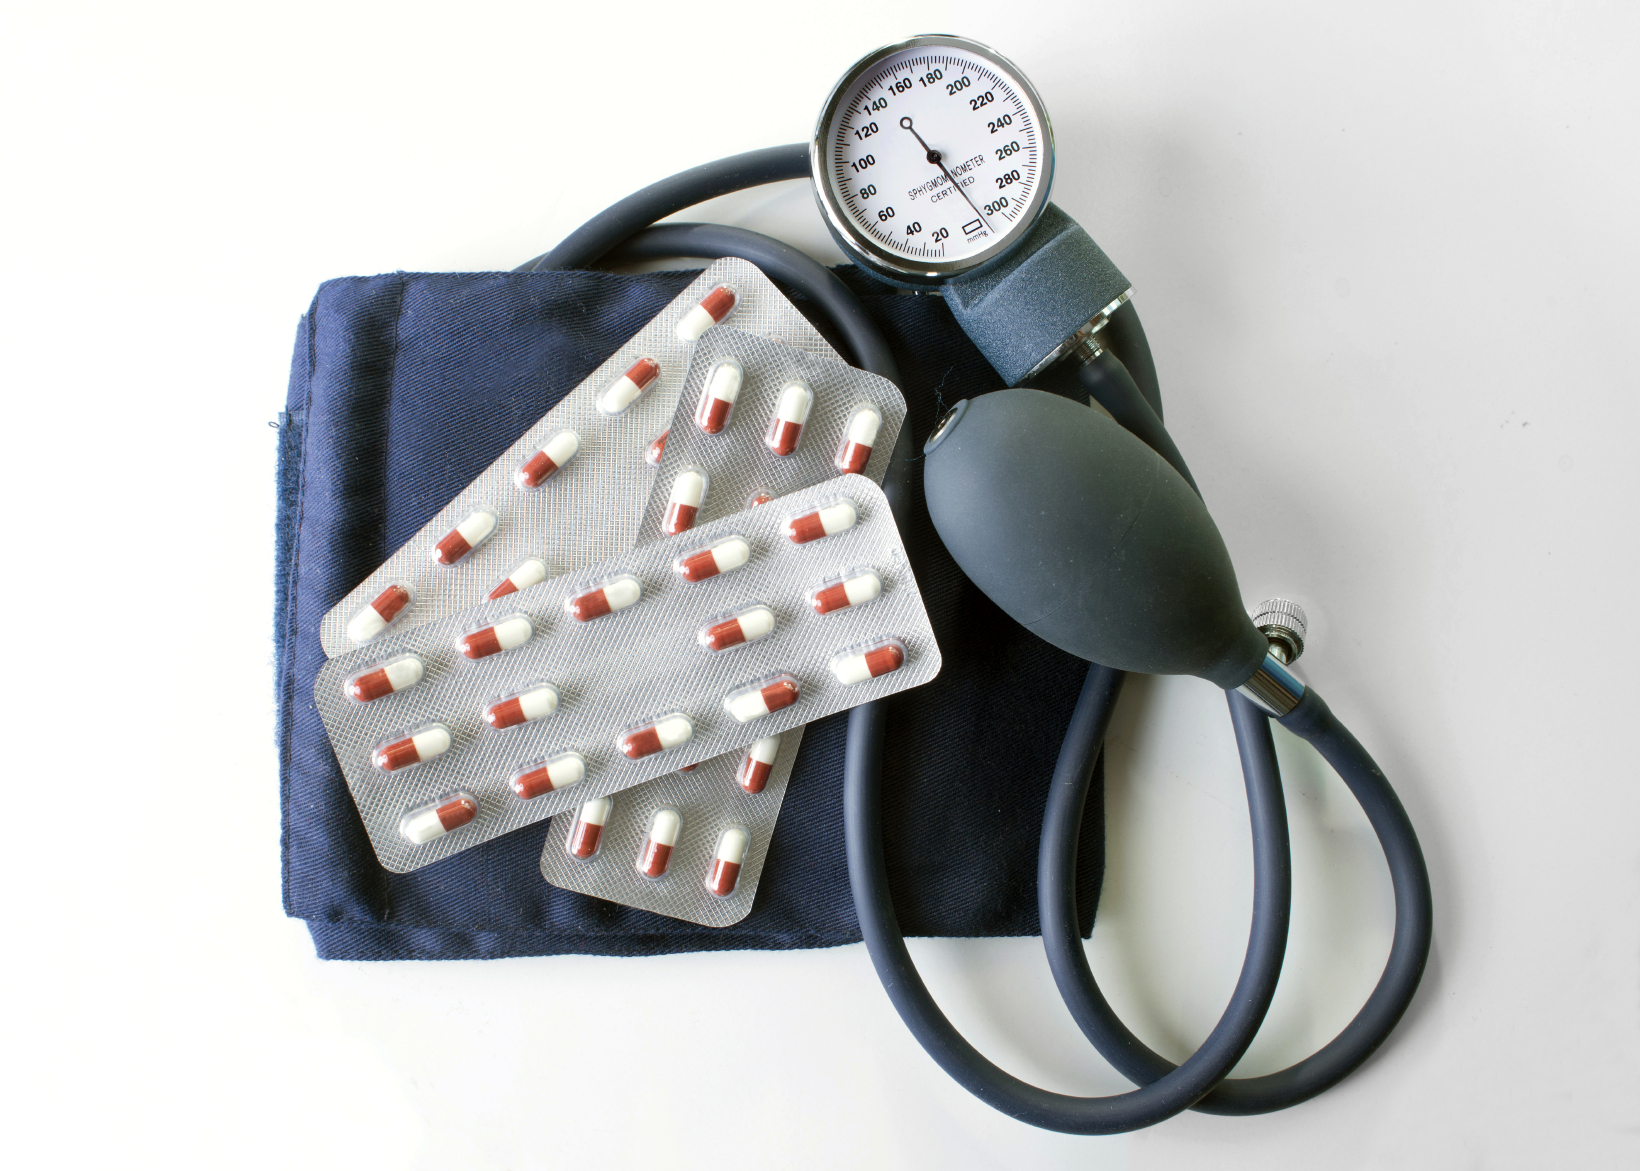 Studies support "risk-based" approach to treating people with high blood pressure